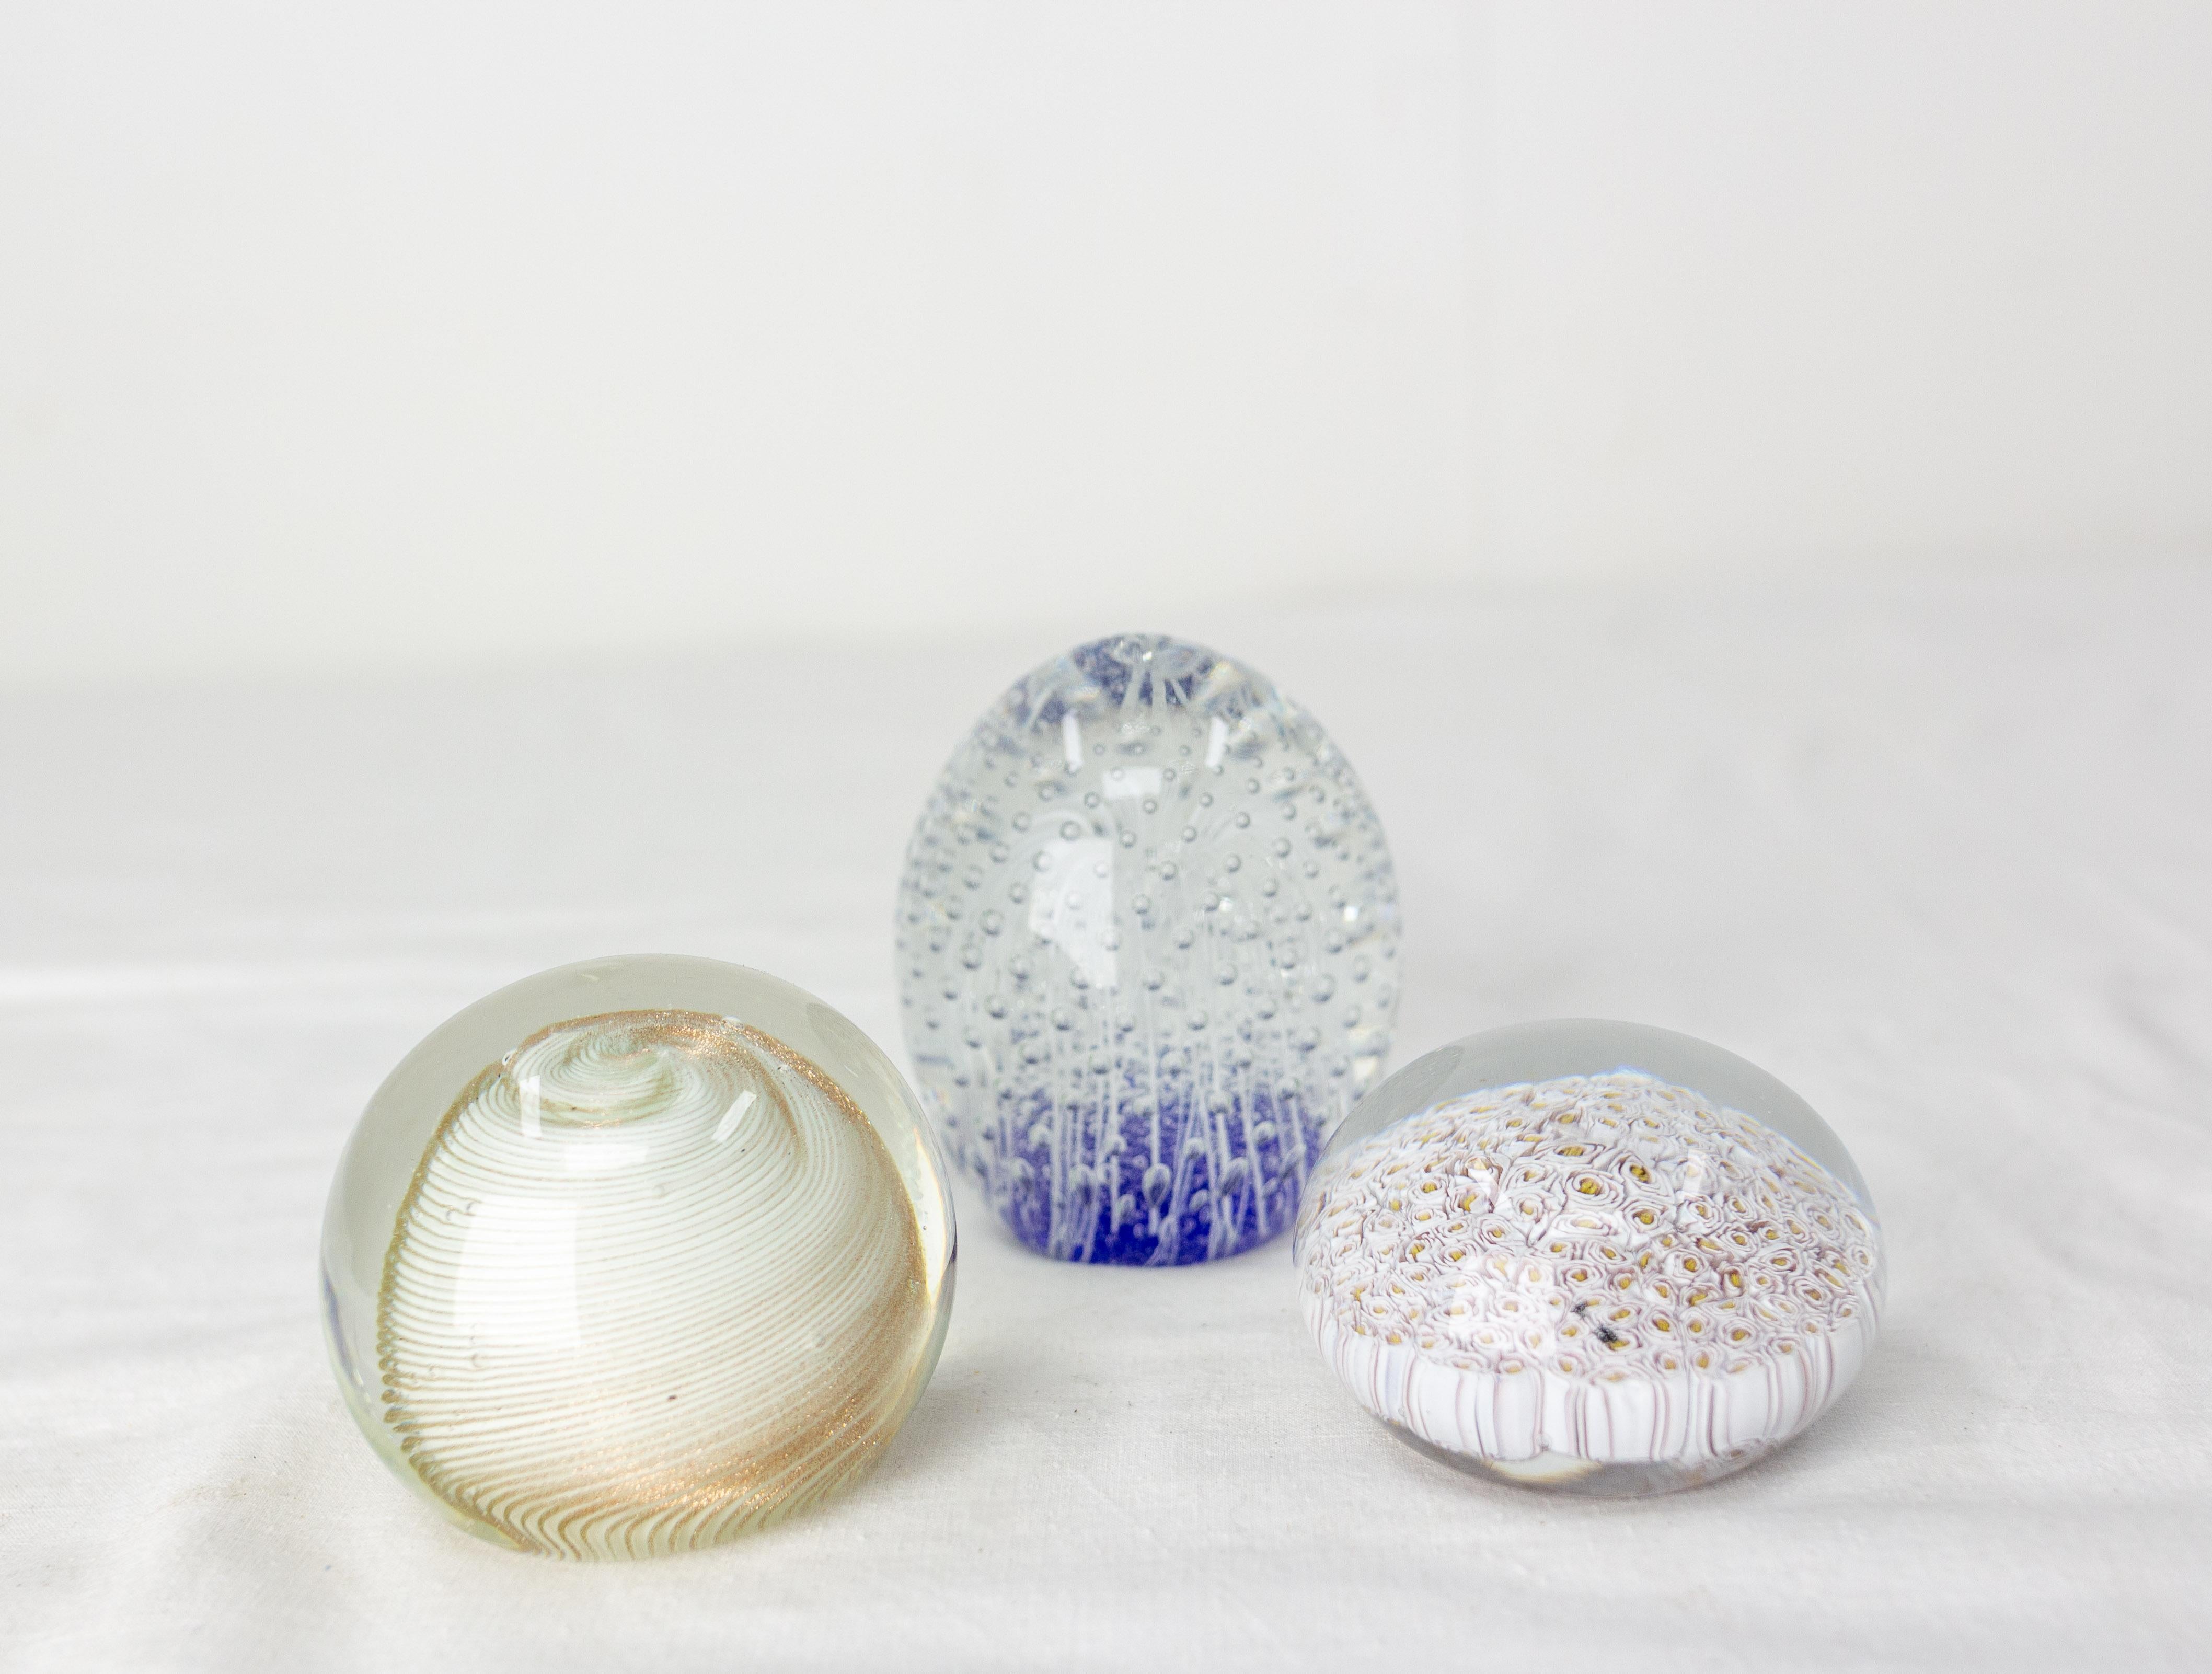 1960s set of three paperweights from Murano Venici
Italian Murano glass
Dimensions of each paperweight:
Blue paperweight: diameter 2.75 in. height 3.74 in. (7 x 9.5 cm)
Flowers paperweight: diameter 2.56 in. height 1.97 in. (6.5 x 5 cm)
Snow